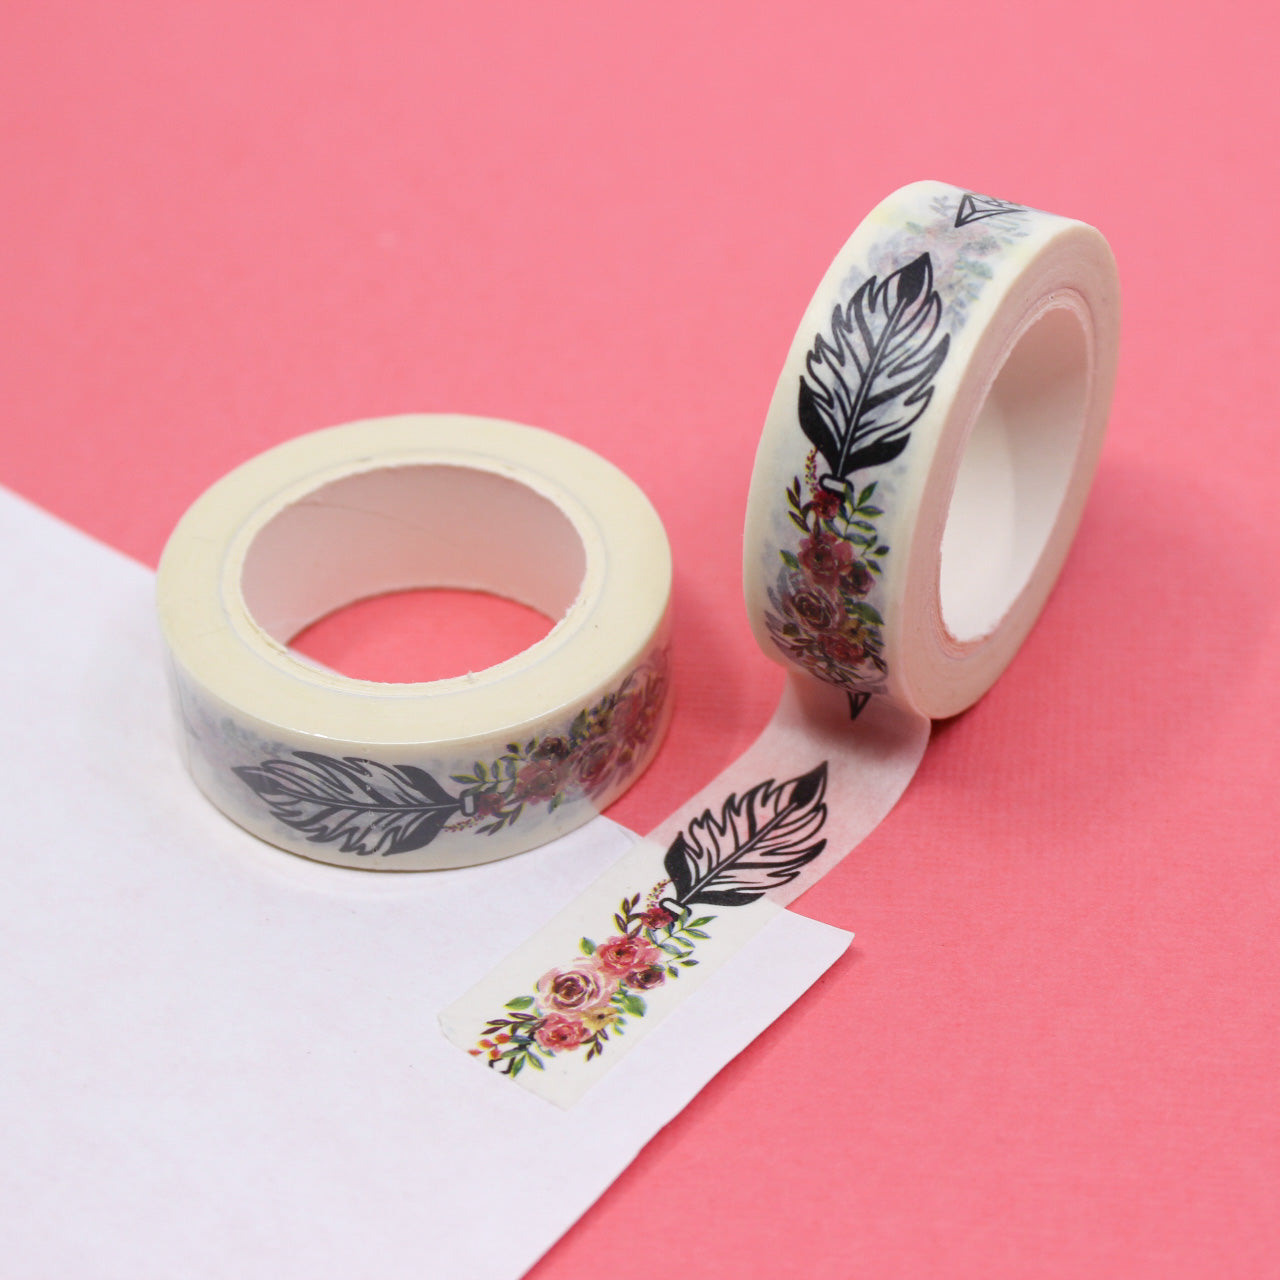 Add a touch of boho chic to your crafts with our 'Boho Floral Arrow' Washi Tape. Featuring intricate floral patterns and arrows for a stylish look. This tape is sold at BBB Supplies Craft Shop.